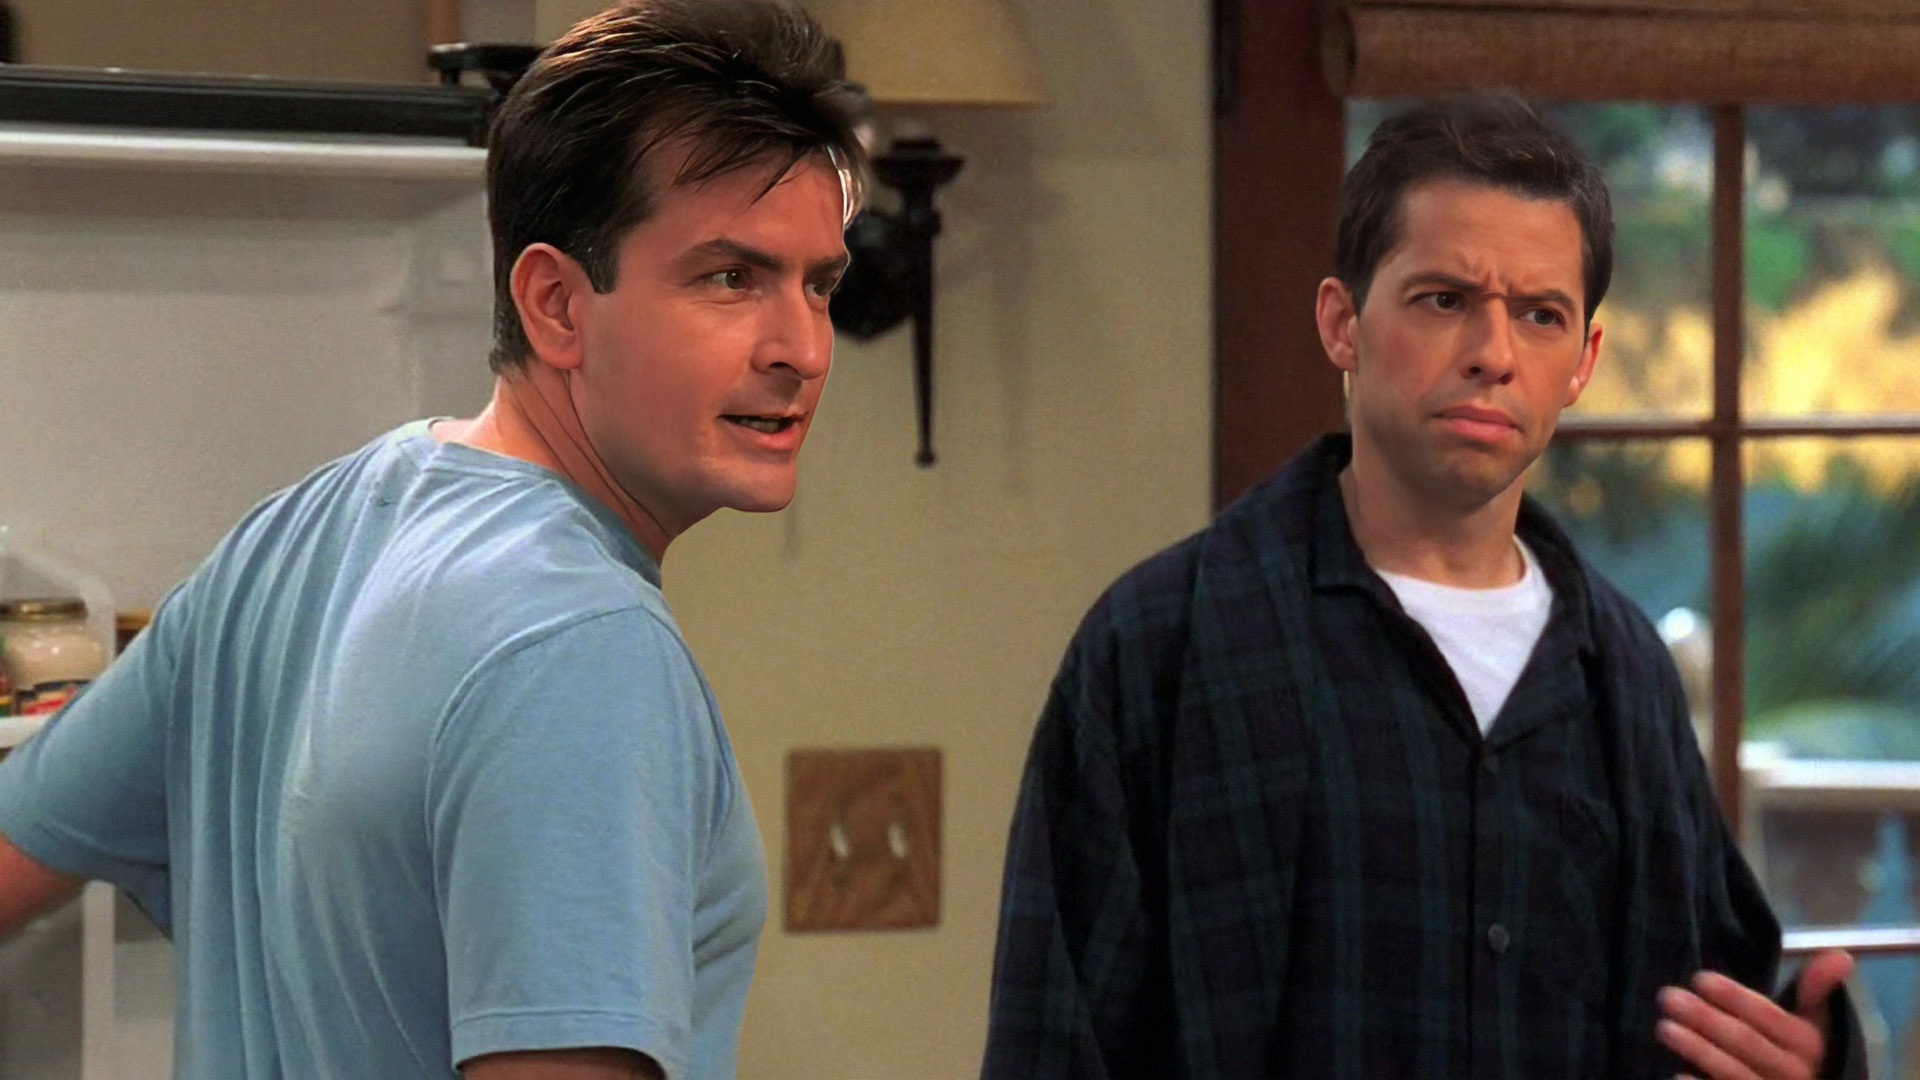 Don't Hope for a Two and a Half Men Reboot, the Show's Star Says It's Unlikely